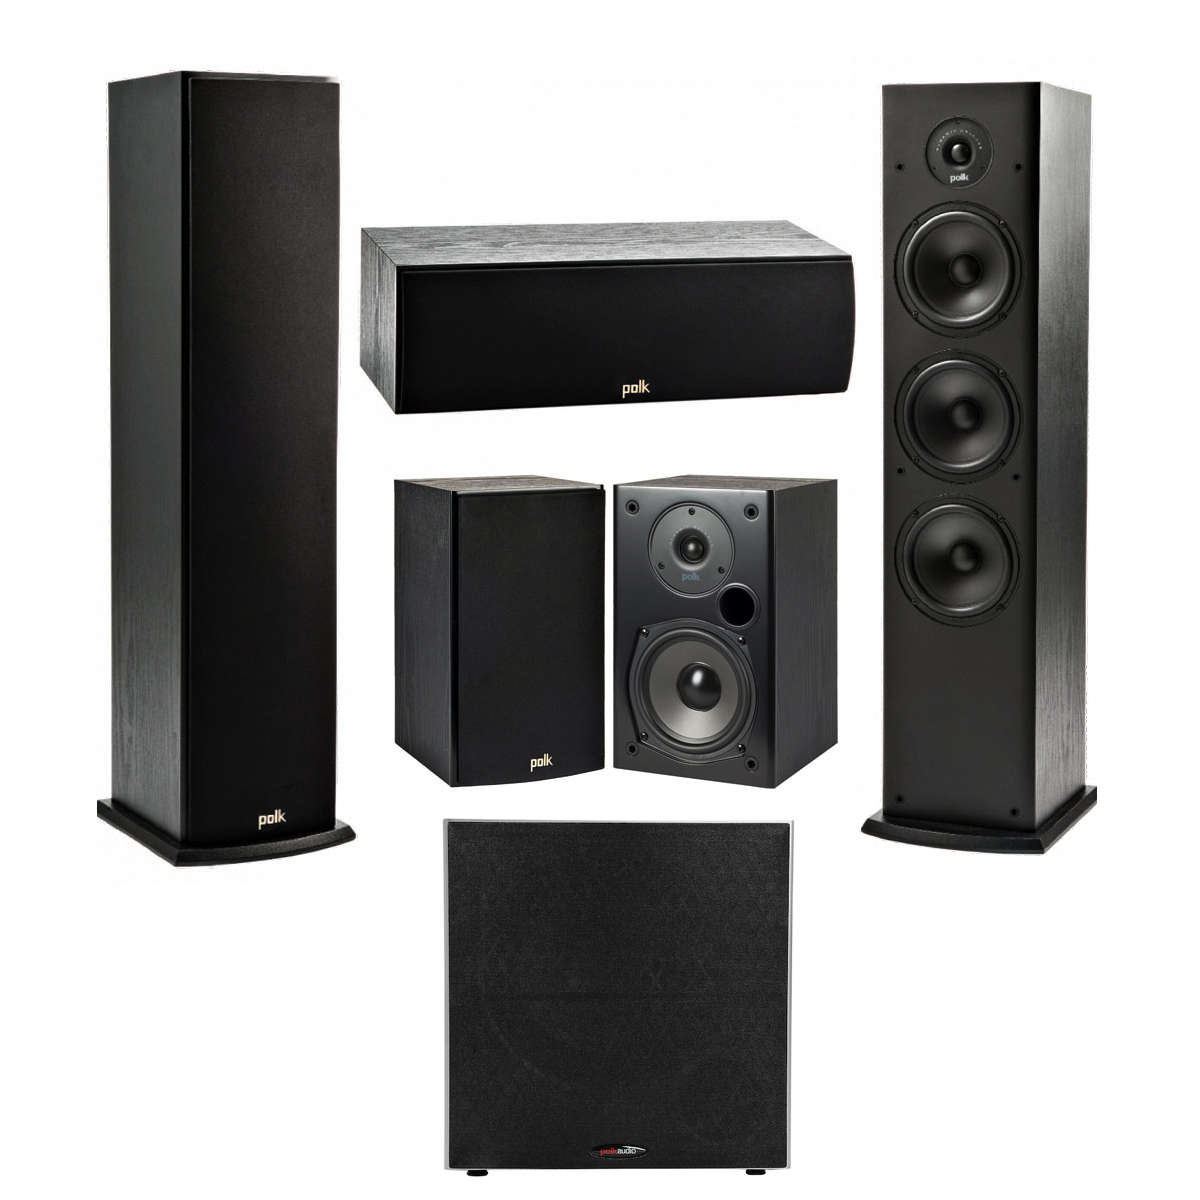 Polk Audio Fusion T- Series 5.1 Channel Home Theater Speaker Package with Polk Audio PSW 10 Subwoofer -  Ooberpad India